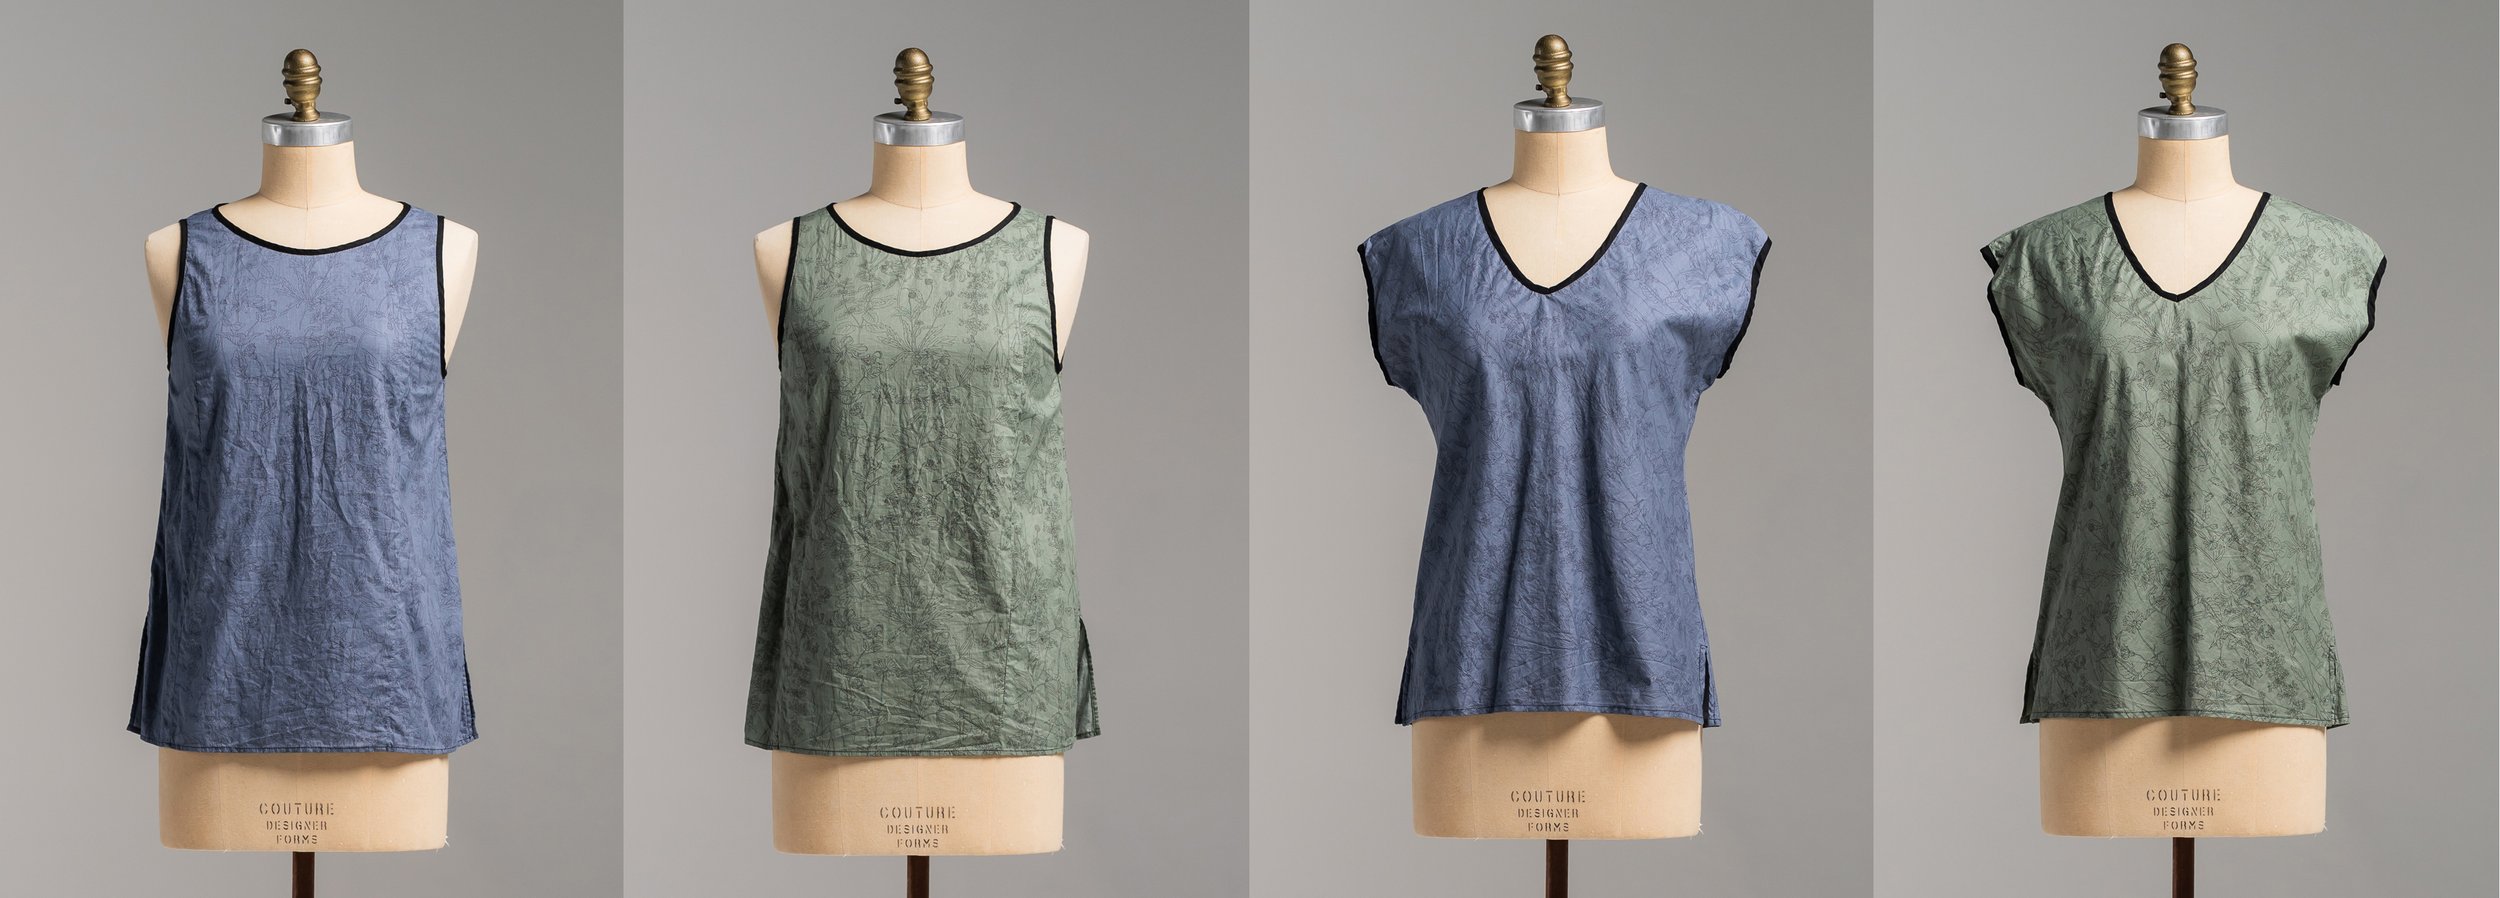 All Japanese Whisper Print - Left To Right:  Monarch Top Blue - Green - Moonflower Top Blue - Green